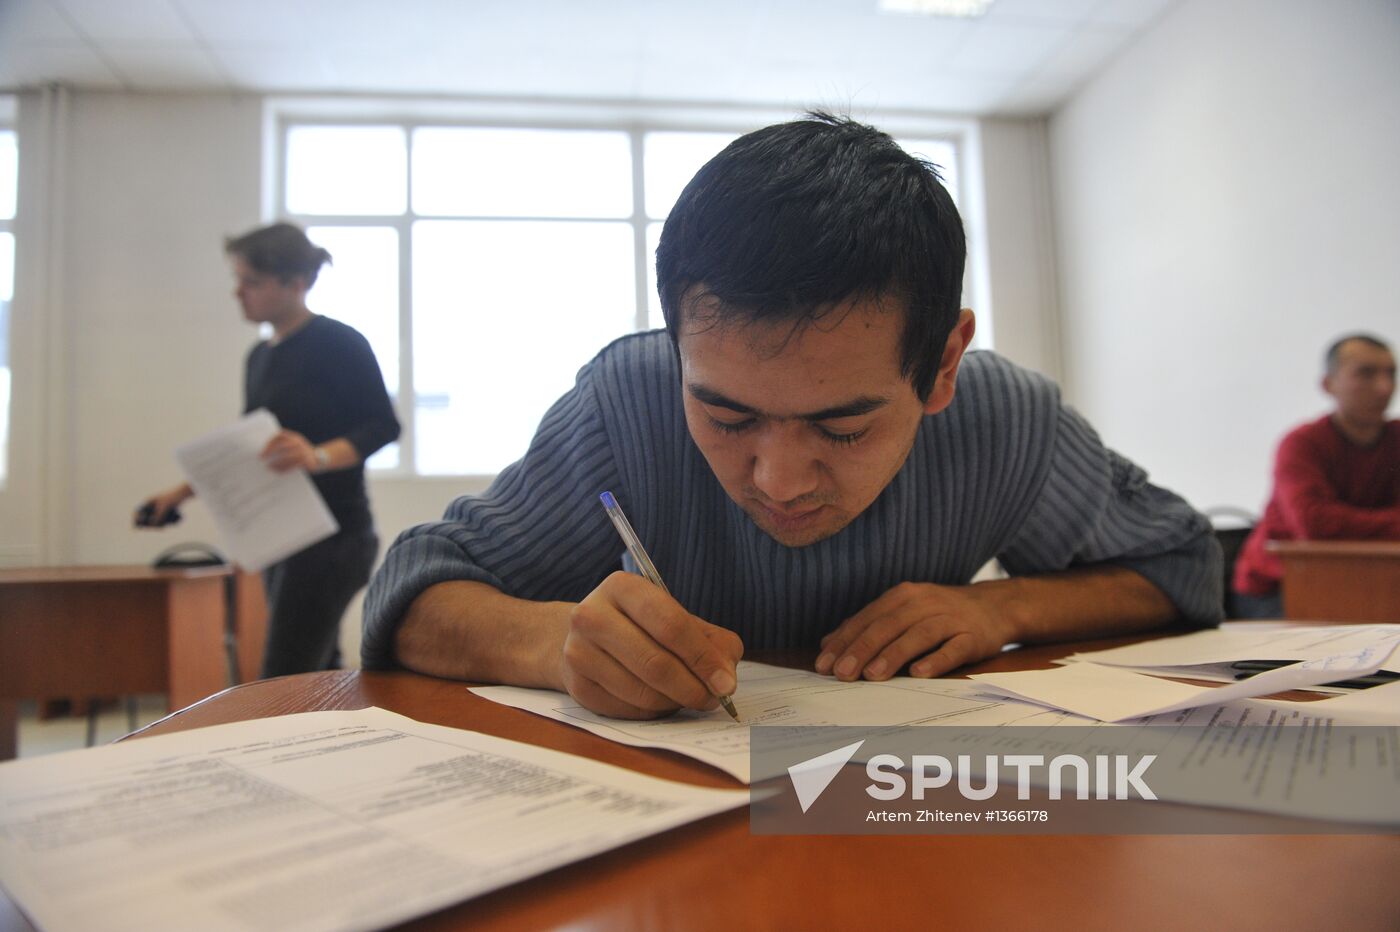 Russian language test for migrant workers